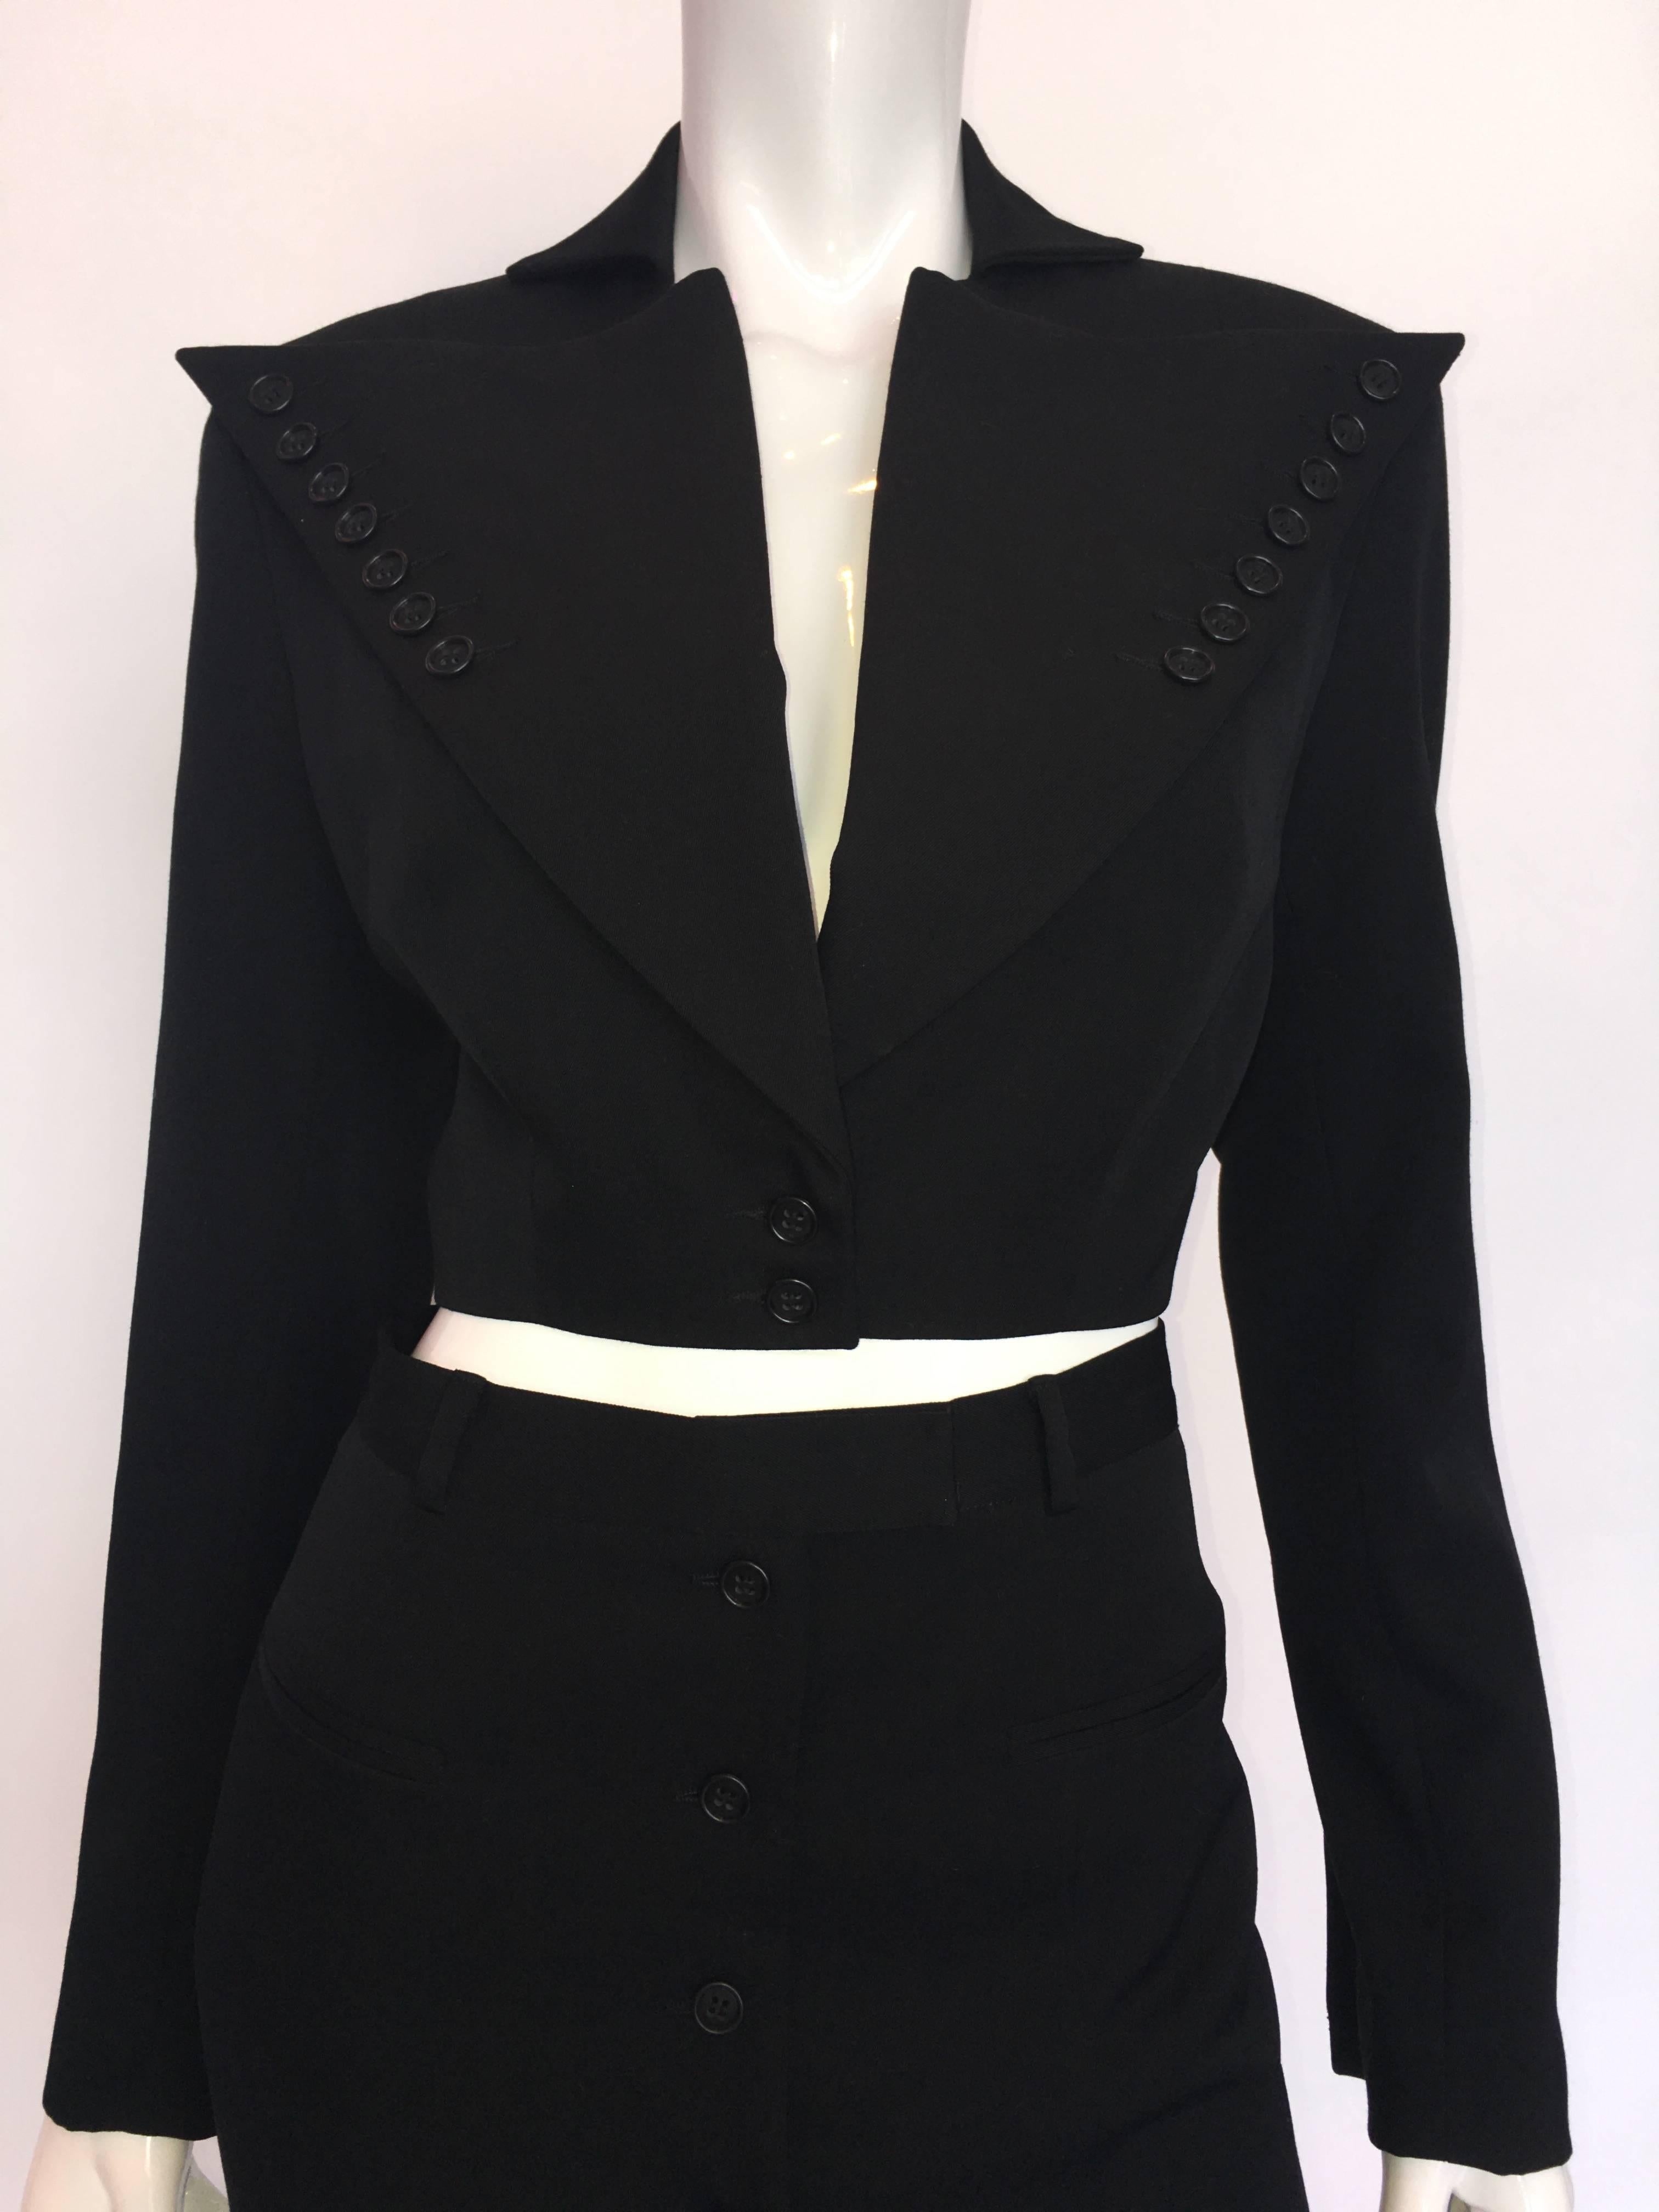 1980s OMO by Norma Kamali Black Wool Mini Skirt Suit with Button Detail ...